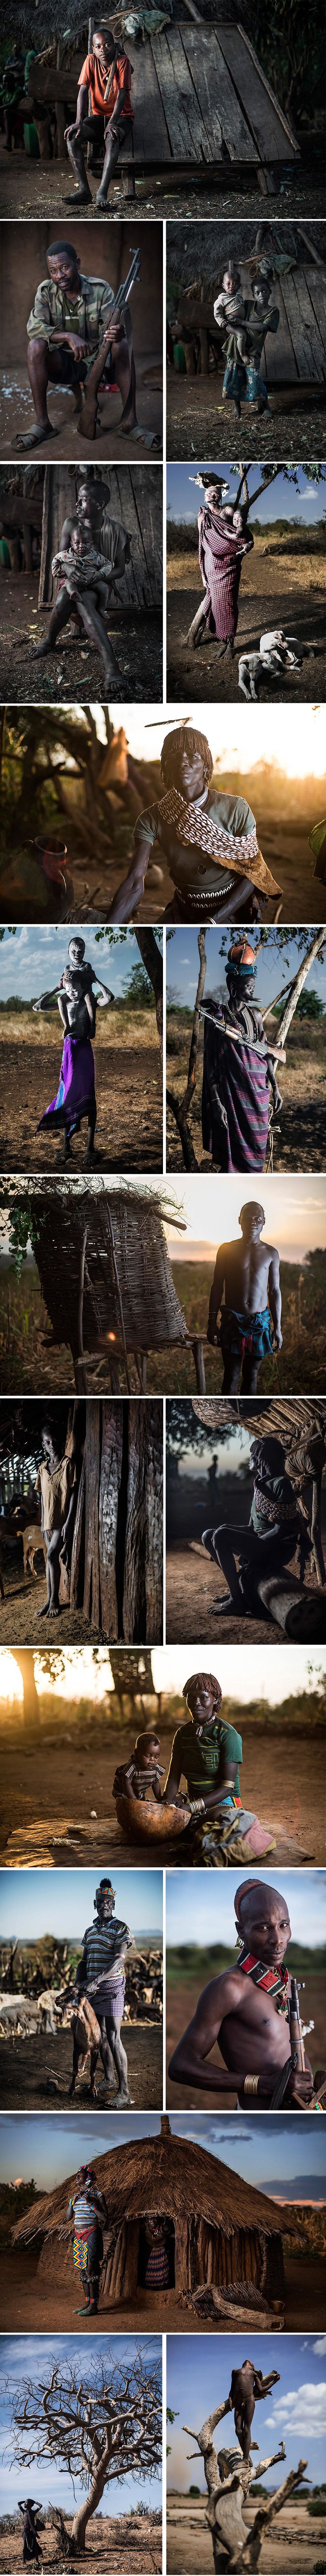 The Tribes Of Omo Valley, Ethiopia